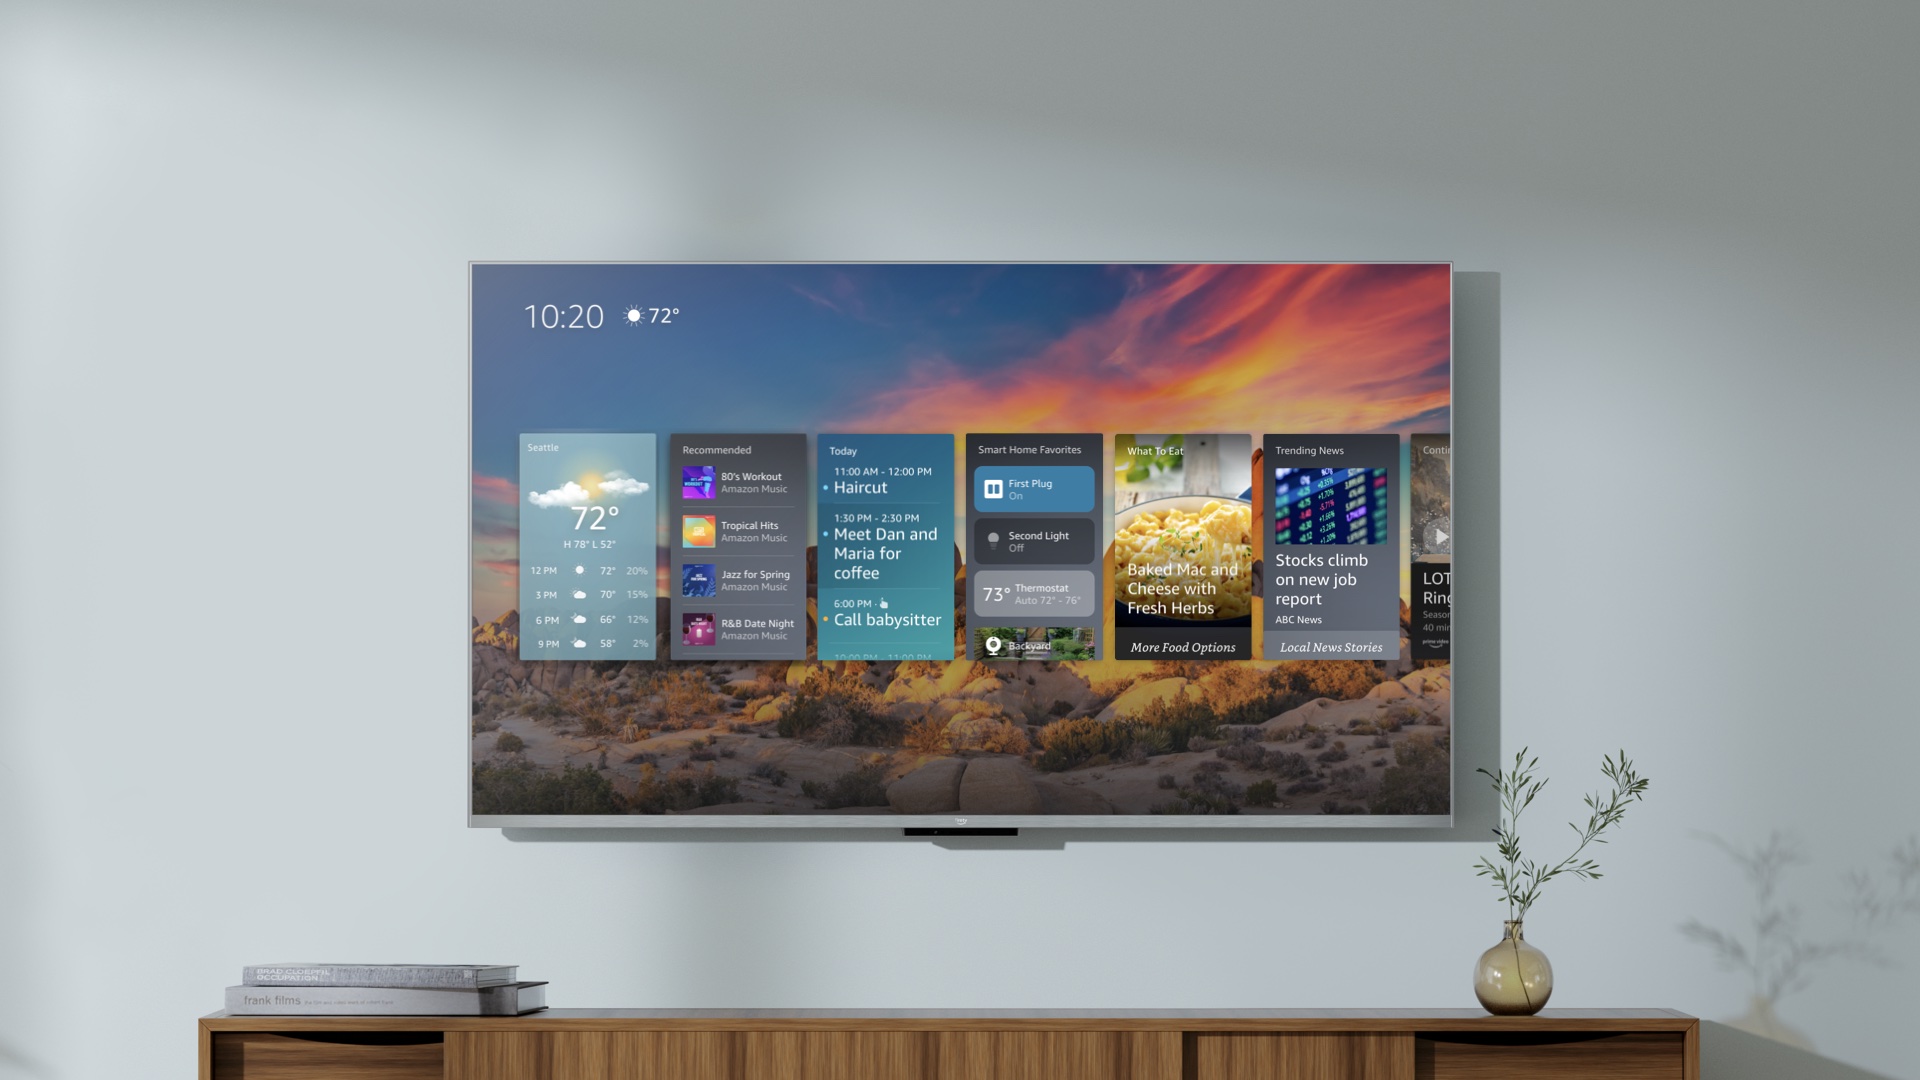 debuts its first Smart TV with Fire TV Stick tech built-in